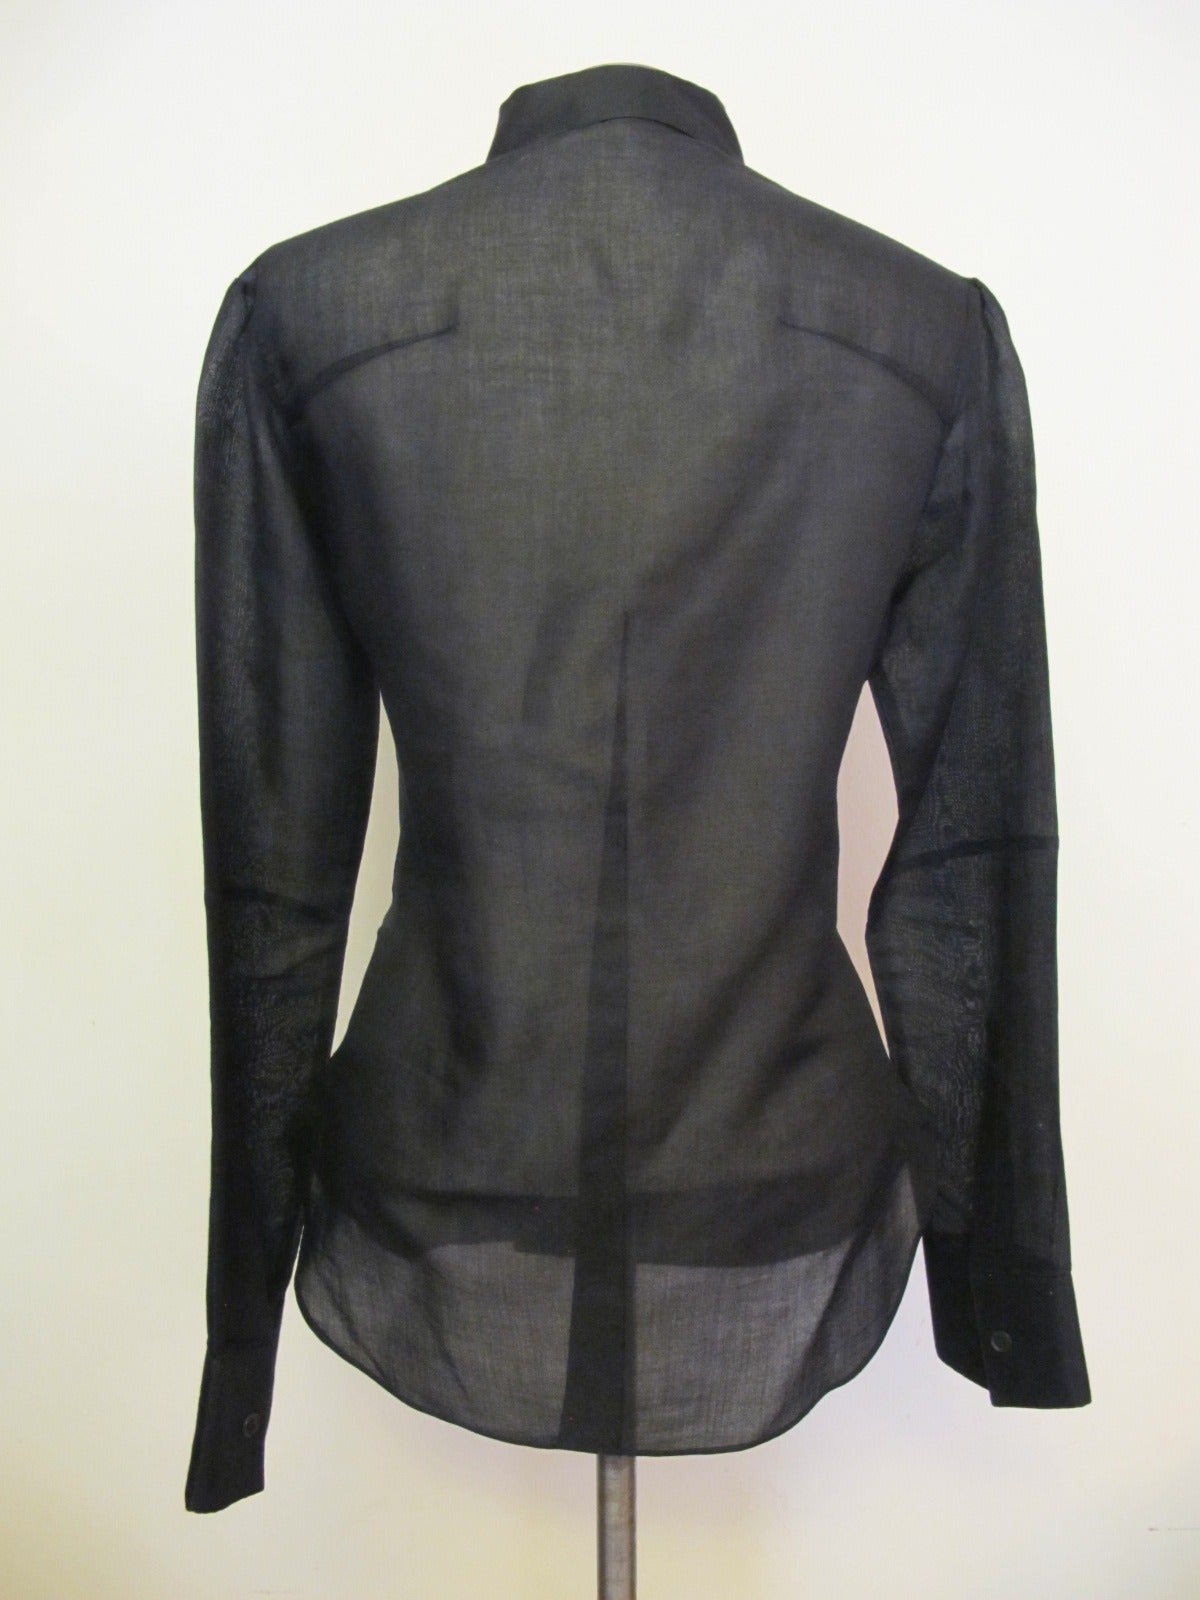 Yohji Yamamoto Coat - Blouse In Excellent Condition For Sale In San Francisco, CA